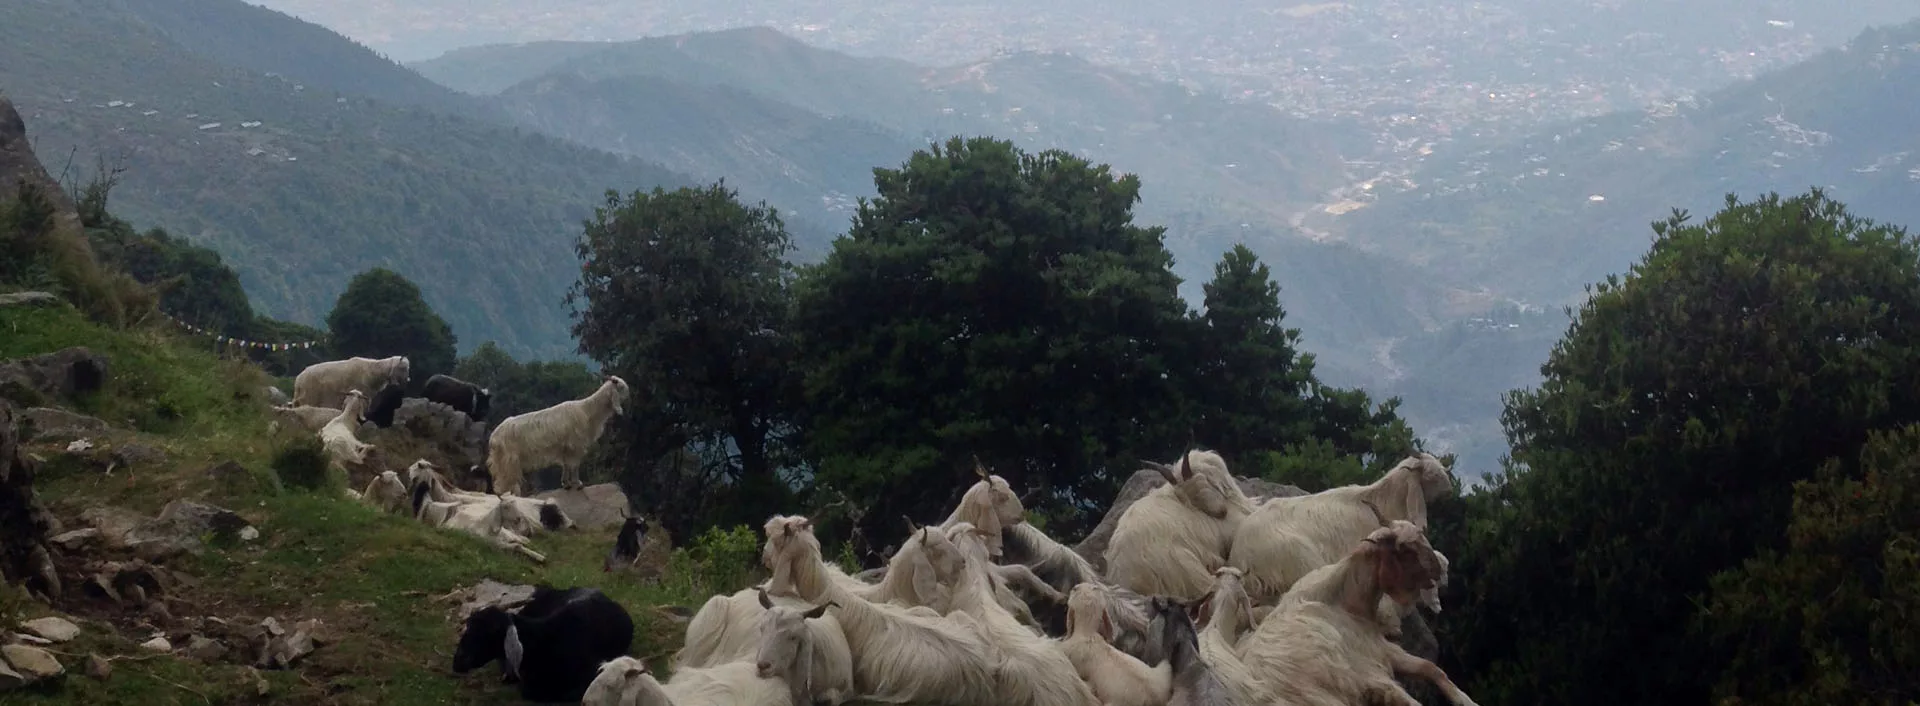 In Triund, a herd of goats rests, with McLeodganj in the backdrop. Away in the distant